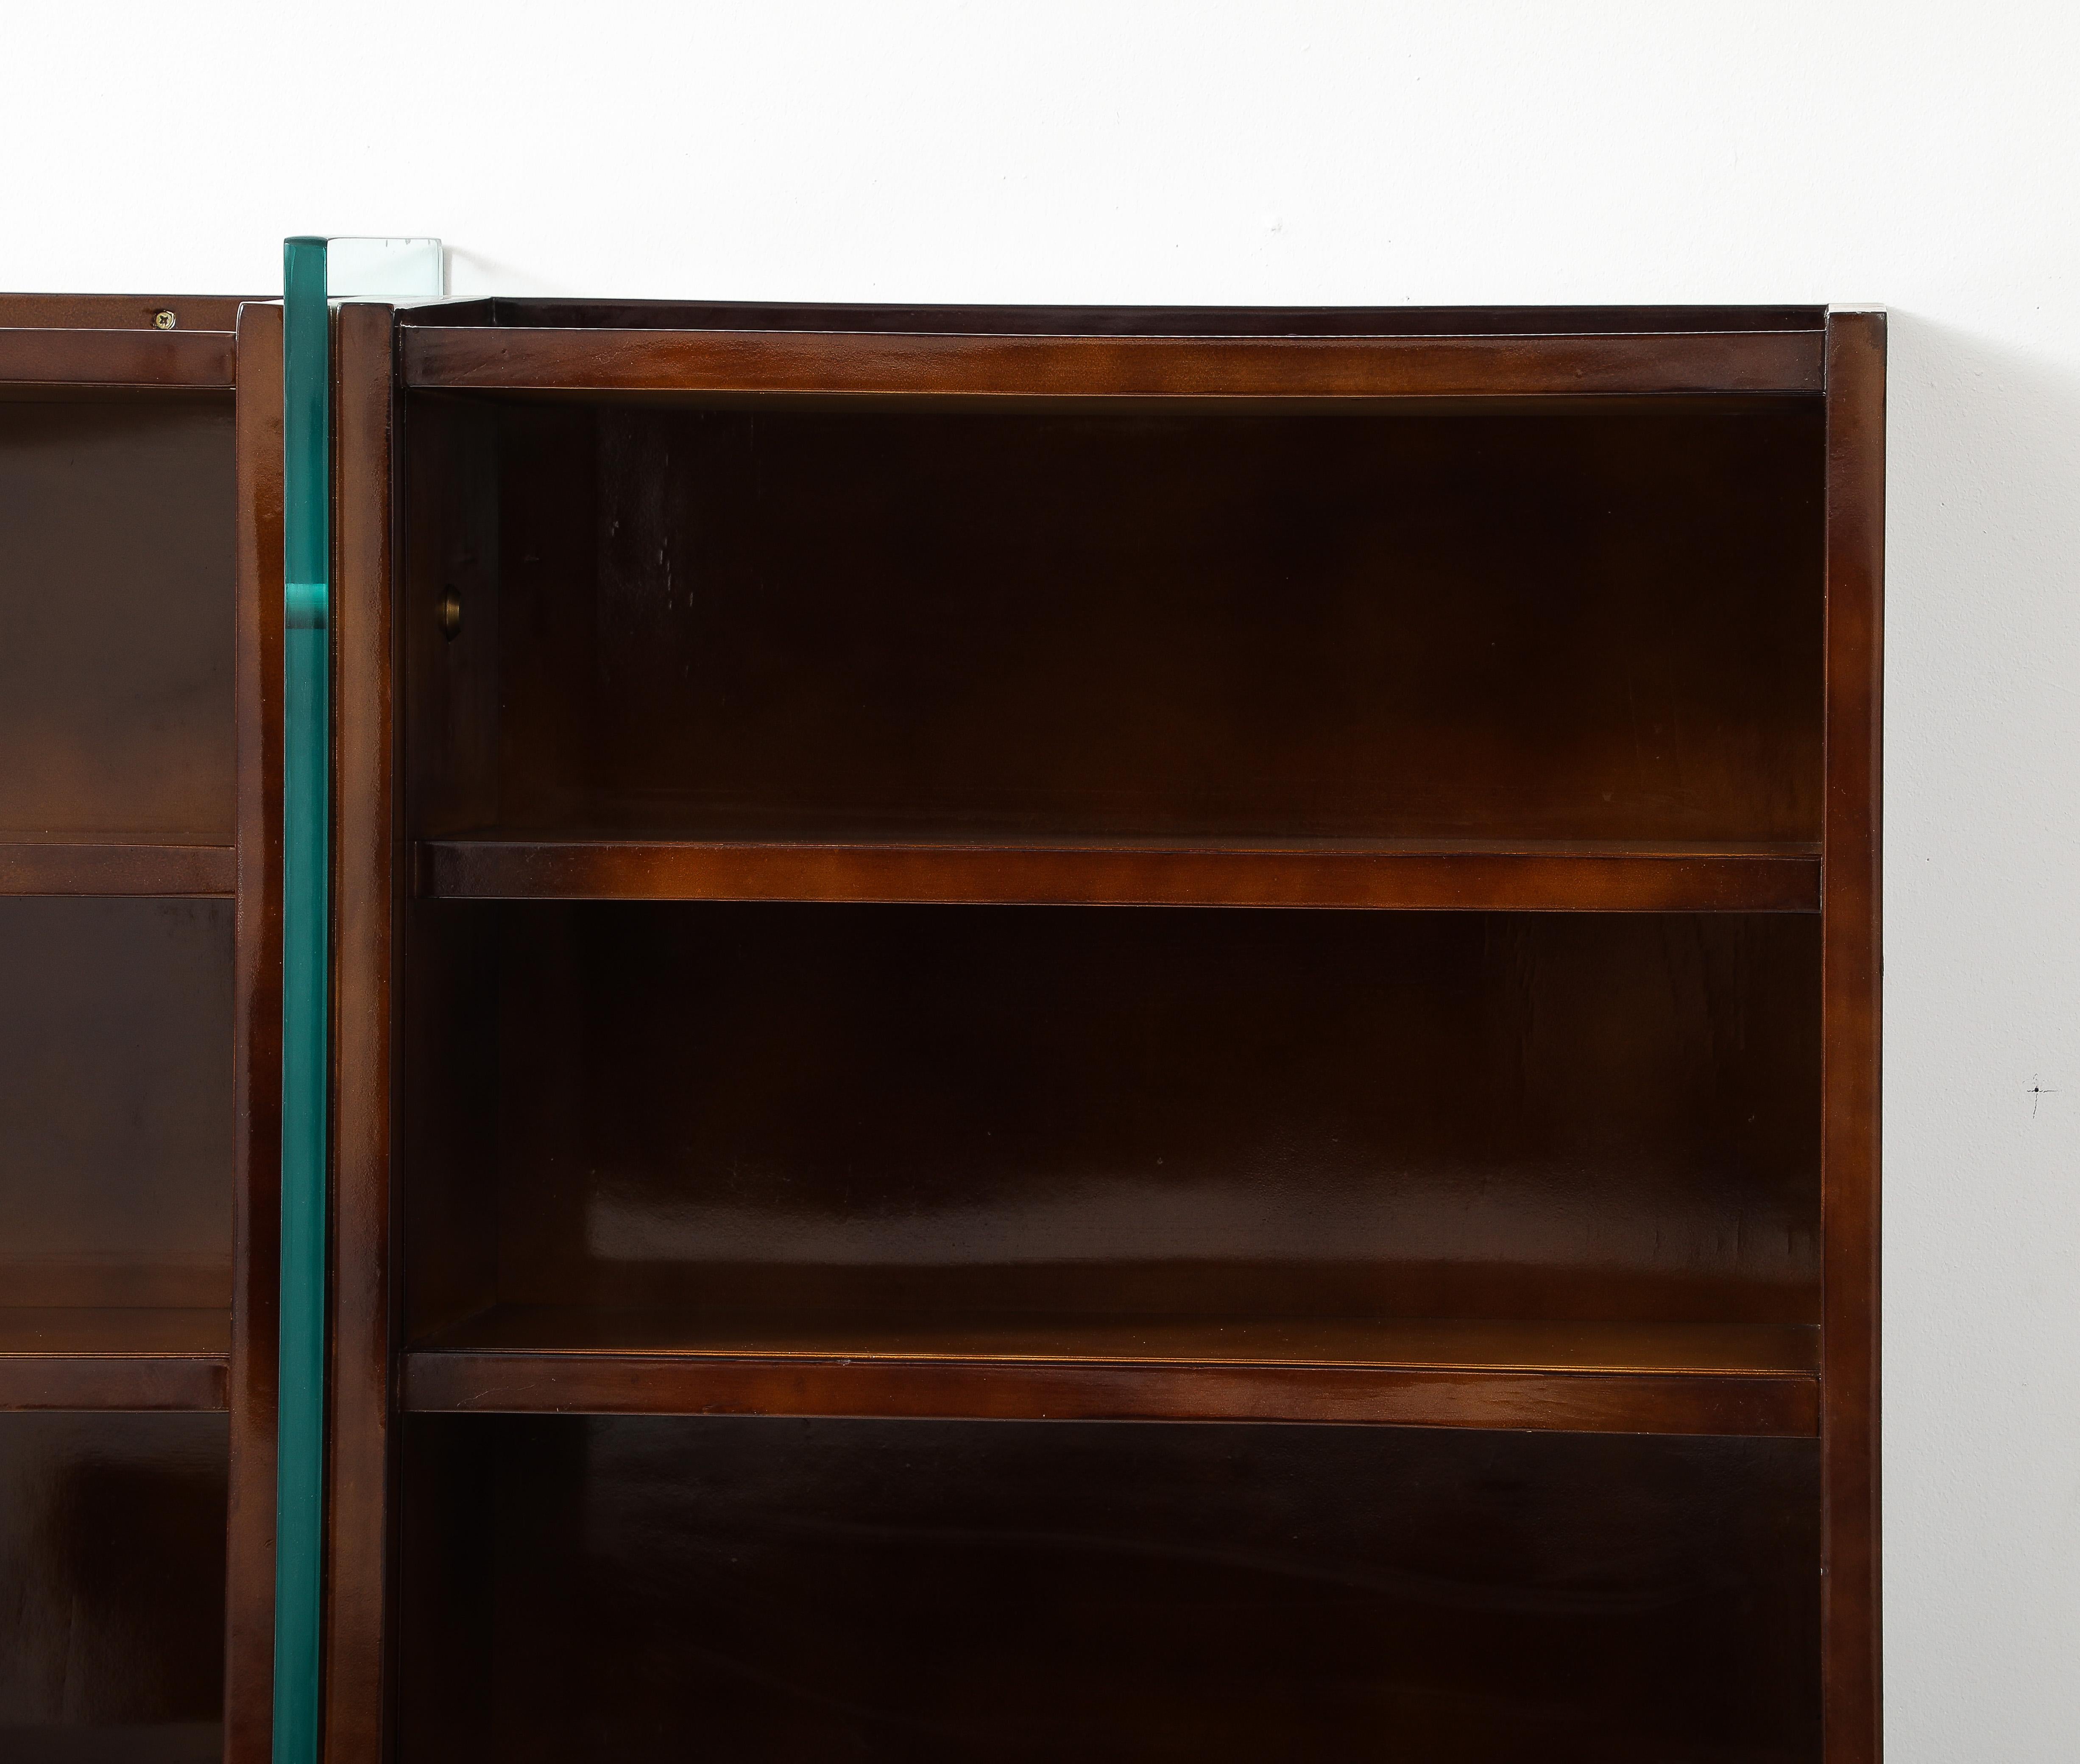 Raphael Raphel Bookcase in Lacquered Wood & Glass, France 1950's In Good Condition For Sale In New York, NY